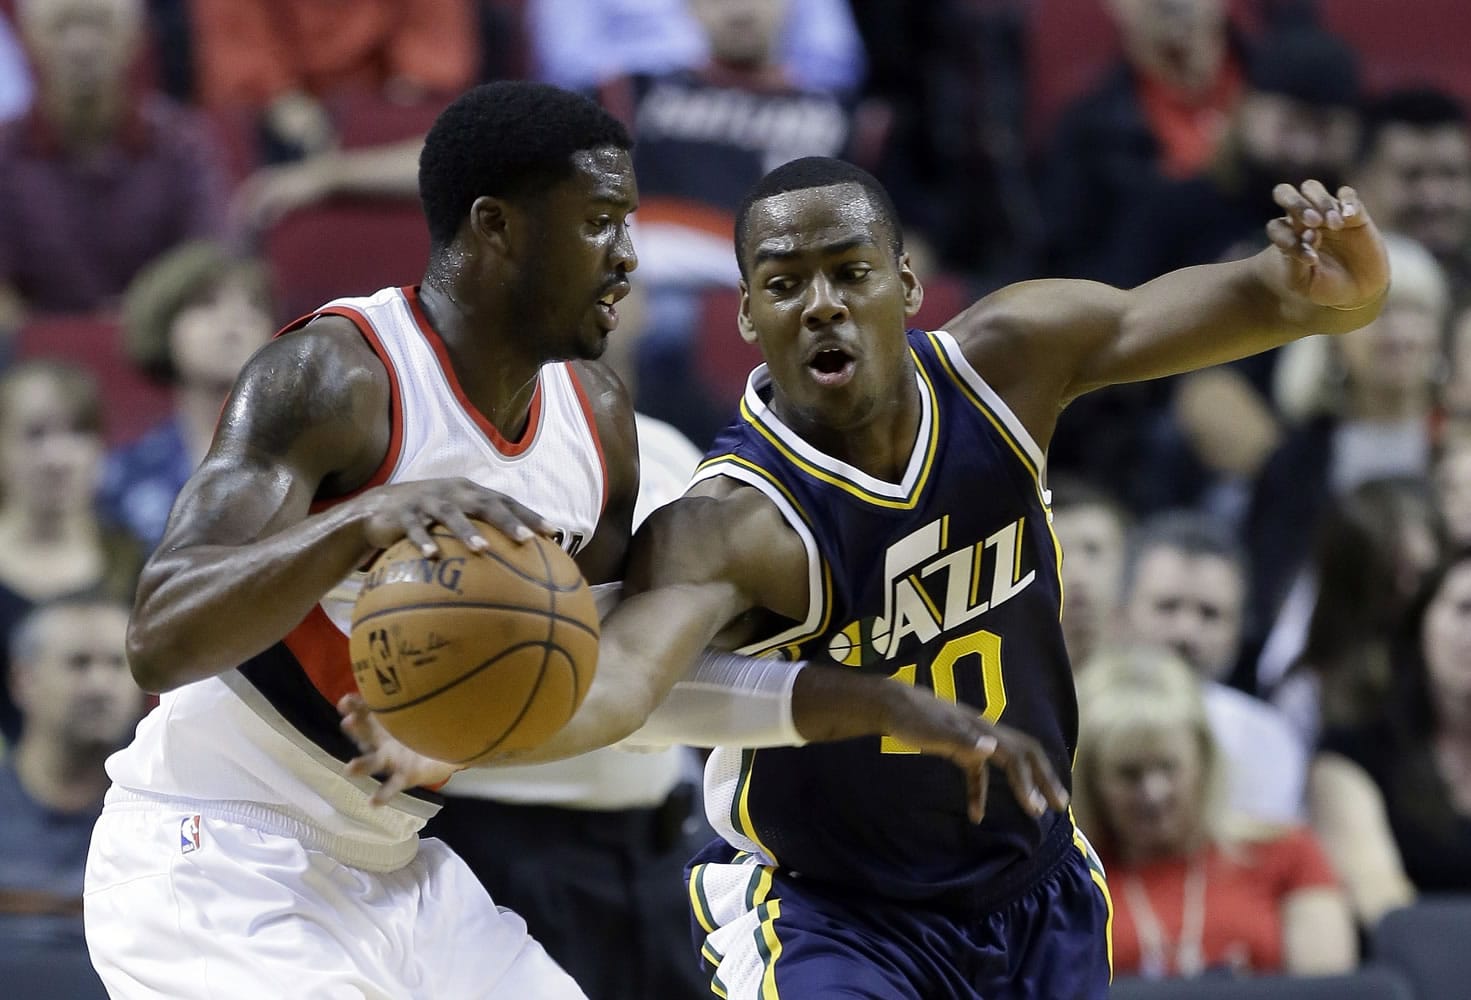 Utah Jazz guard Alec Burks, right, reaches in on Portland Trail Blazers guard Wesley Matthews during the first half of a pre-season NBA basketball game in Portland, Ore., Thursday, Oct.